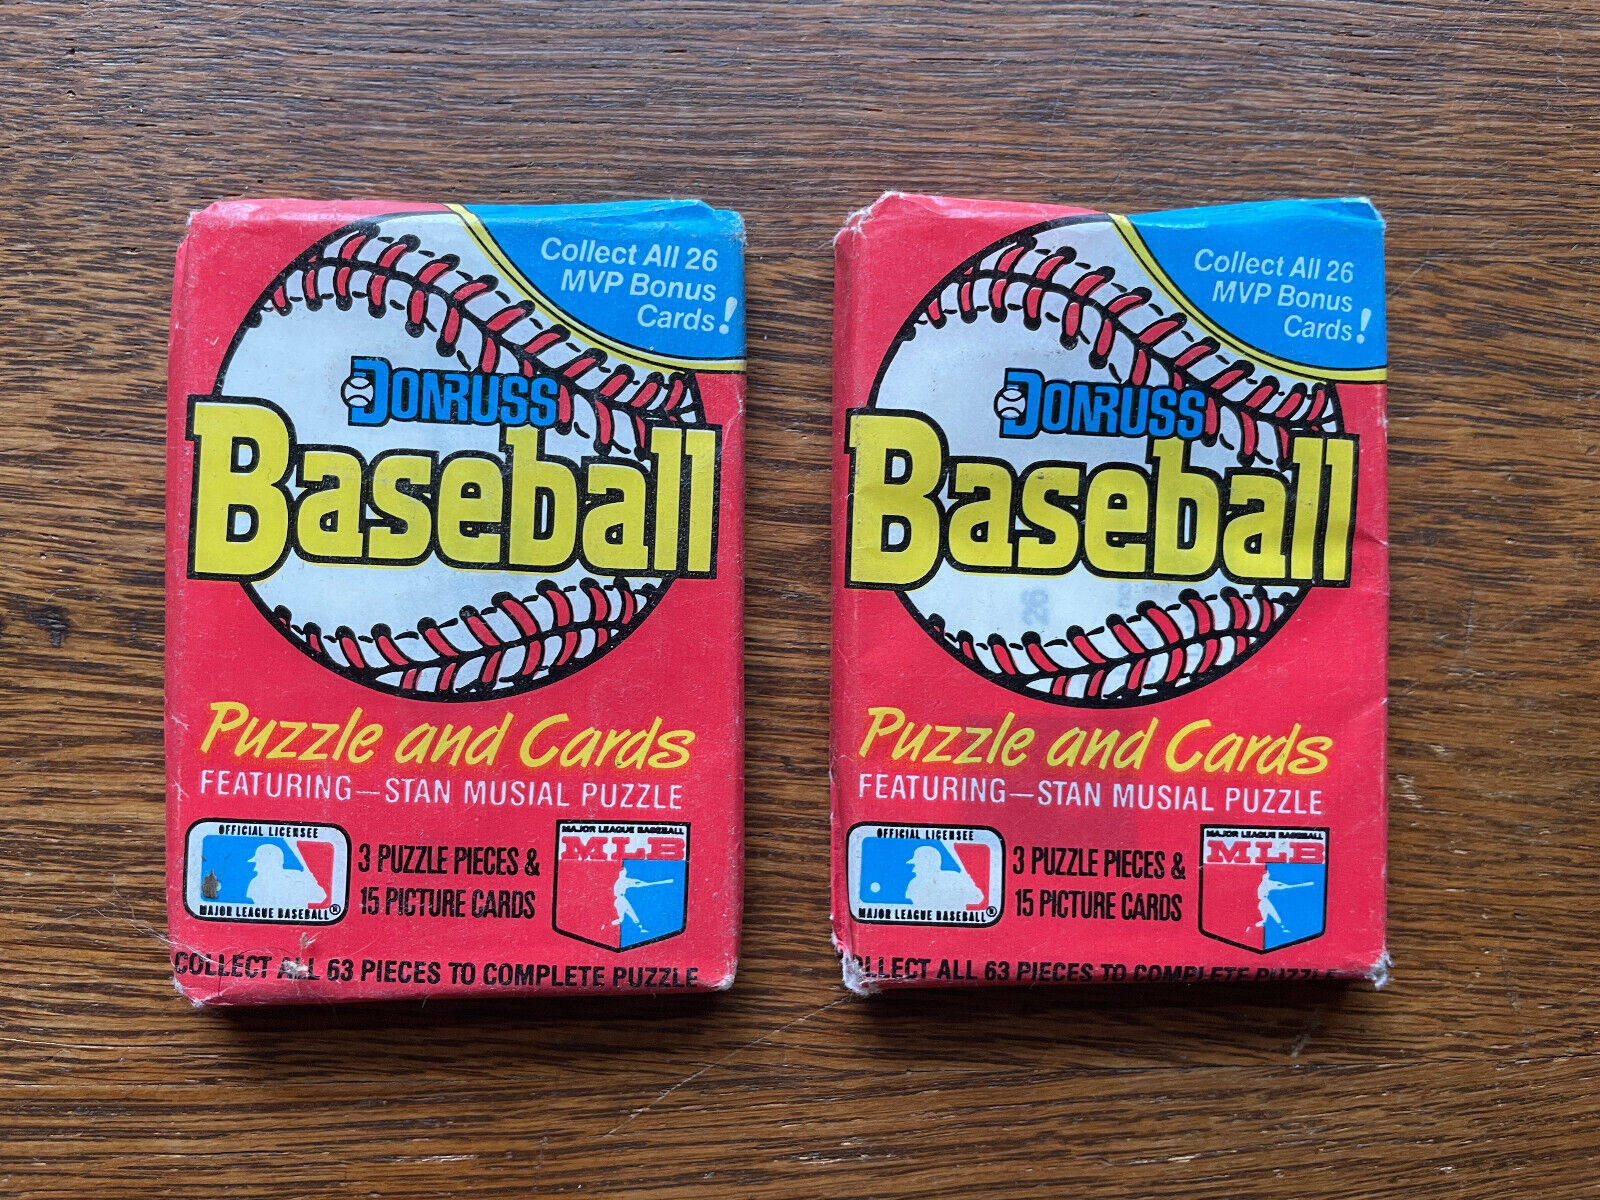 2 UNOPENED WAX PACKS OF 1988 DONRUSS MAJOR LEAGUE BASEBALL PUZZLE & CARDS MUSIAL